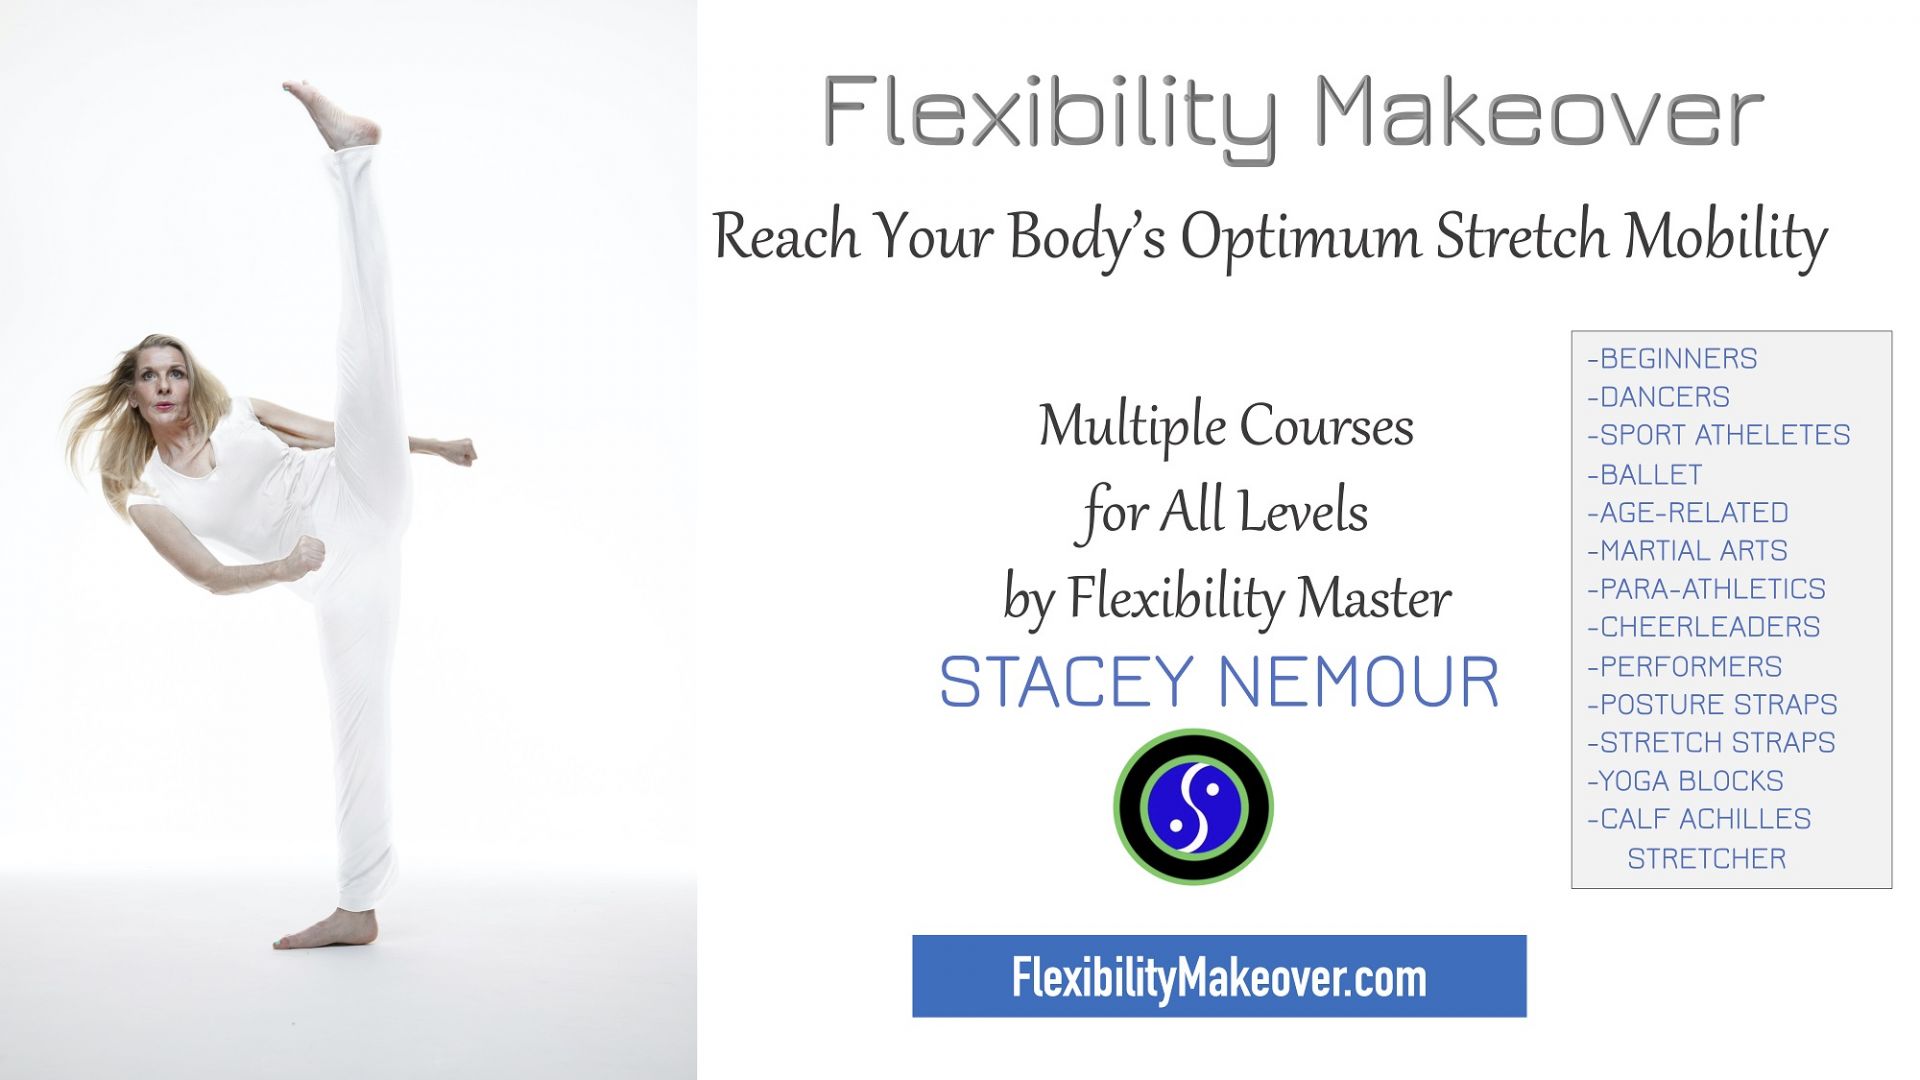 Flexibility Makeover Courses  Optimal Stretch Mobility techniques to increase flexibility